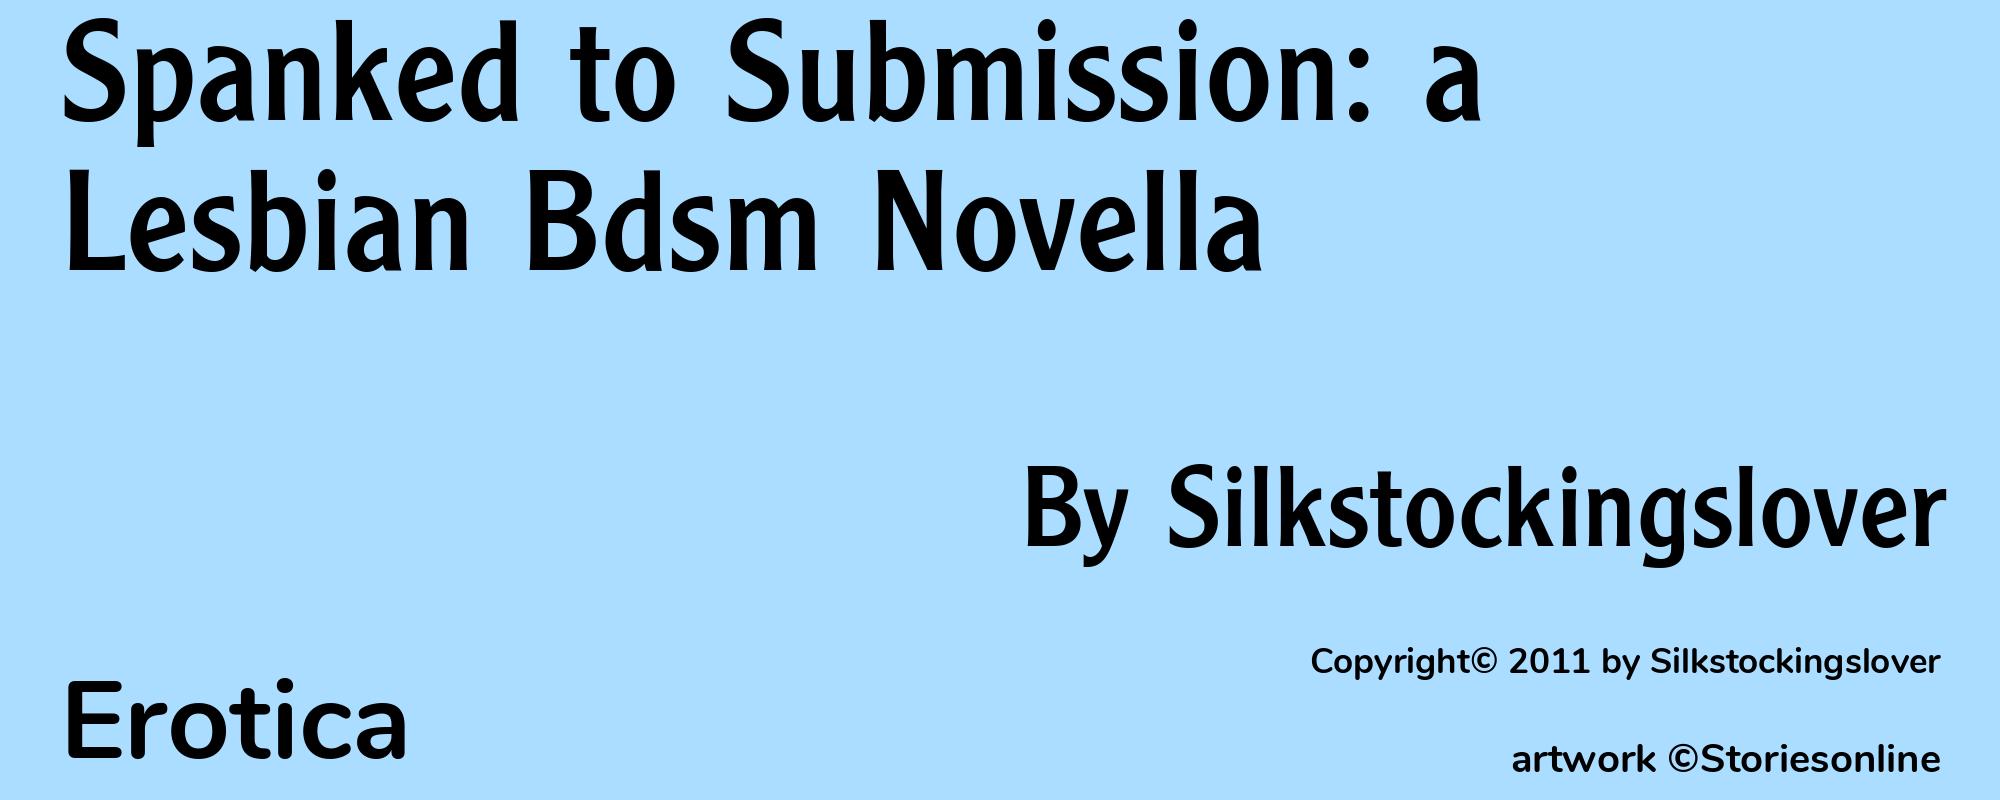 Spanked to Submission: a Lesbian Bdsm Novella - Cover